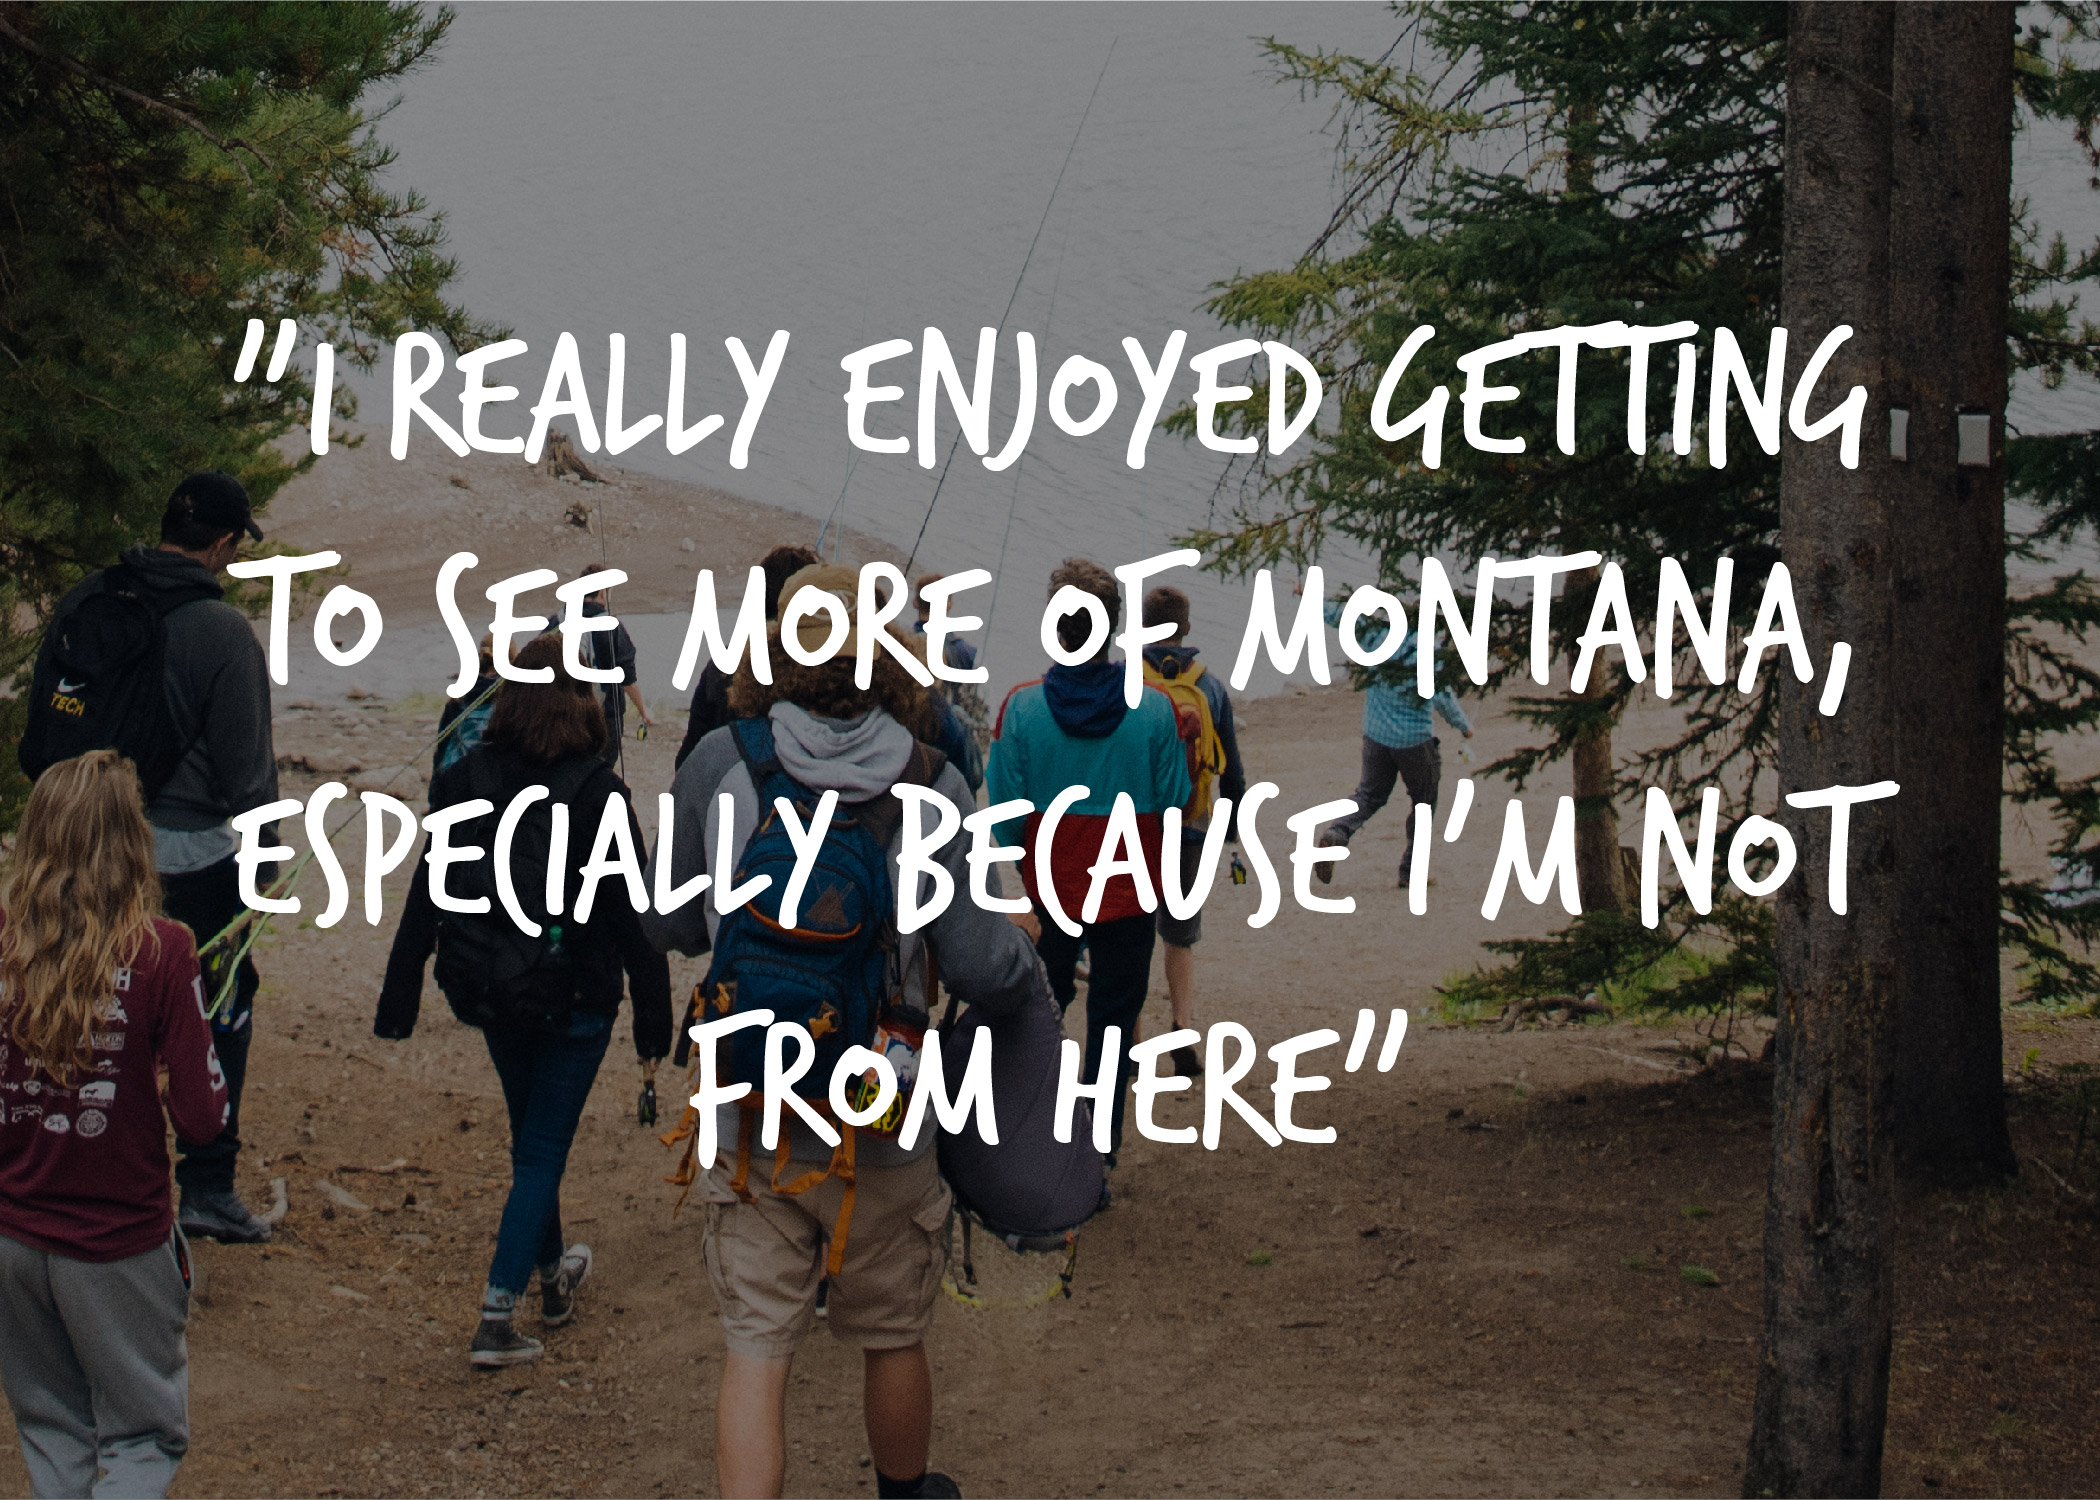 students with quote "I really enjoyed getting to know Montana, especially becasue 